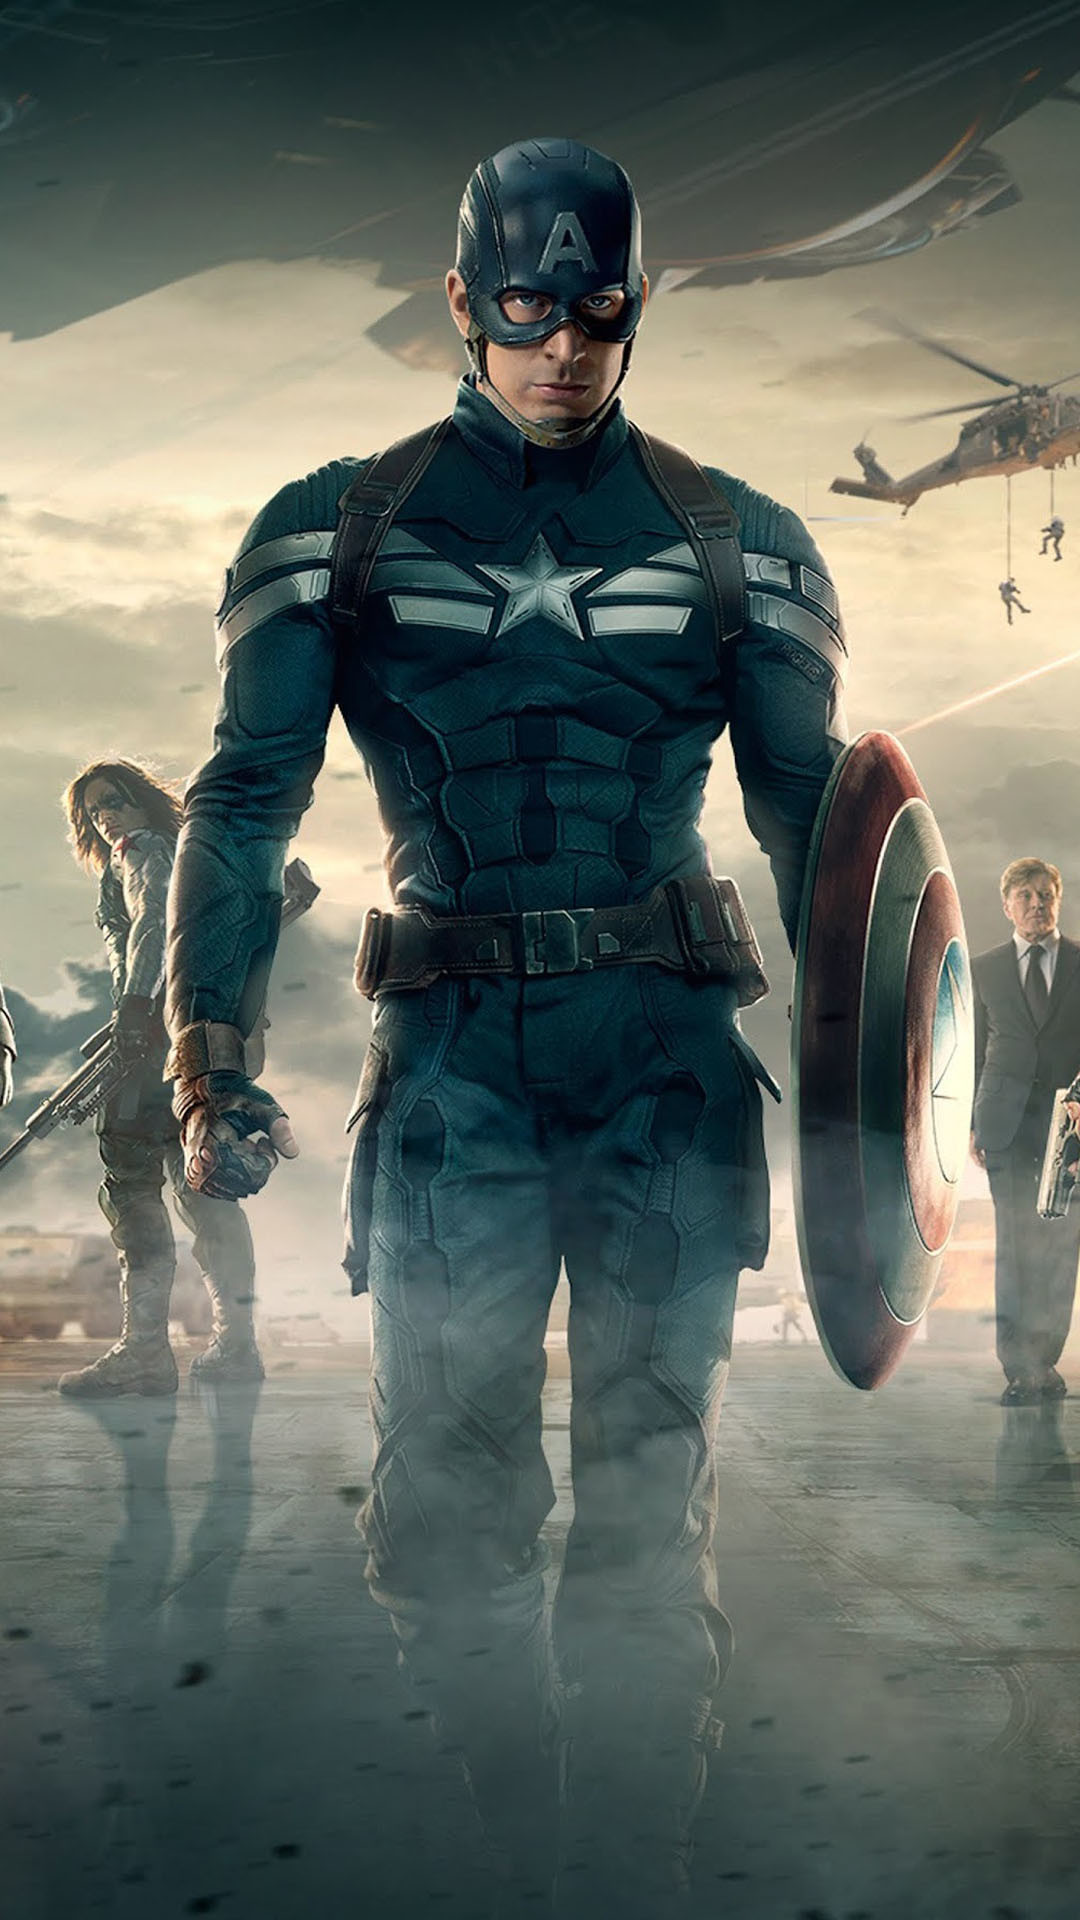 1080x1920 Captain America 2 The Winter Soldier Android Wallpaper ...